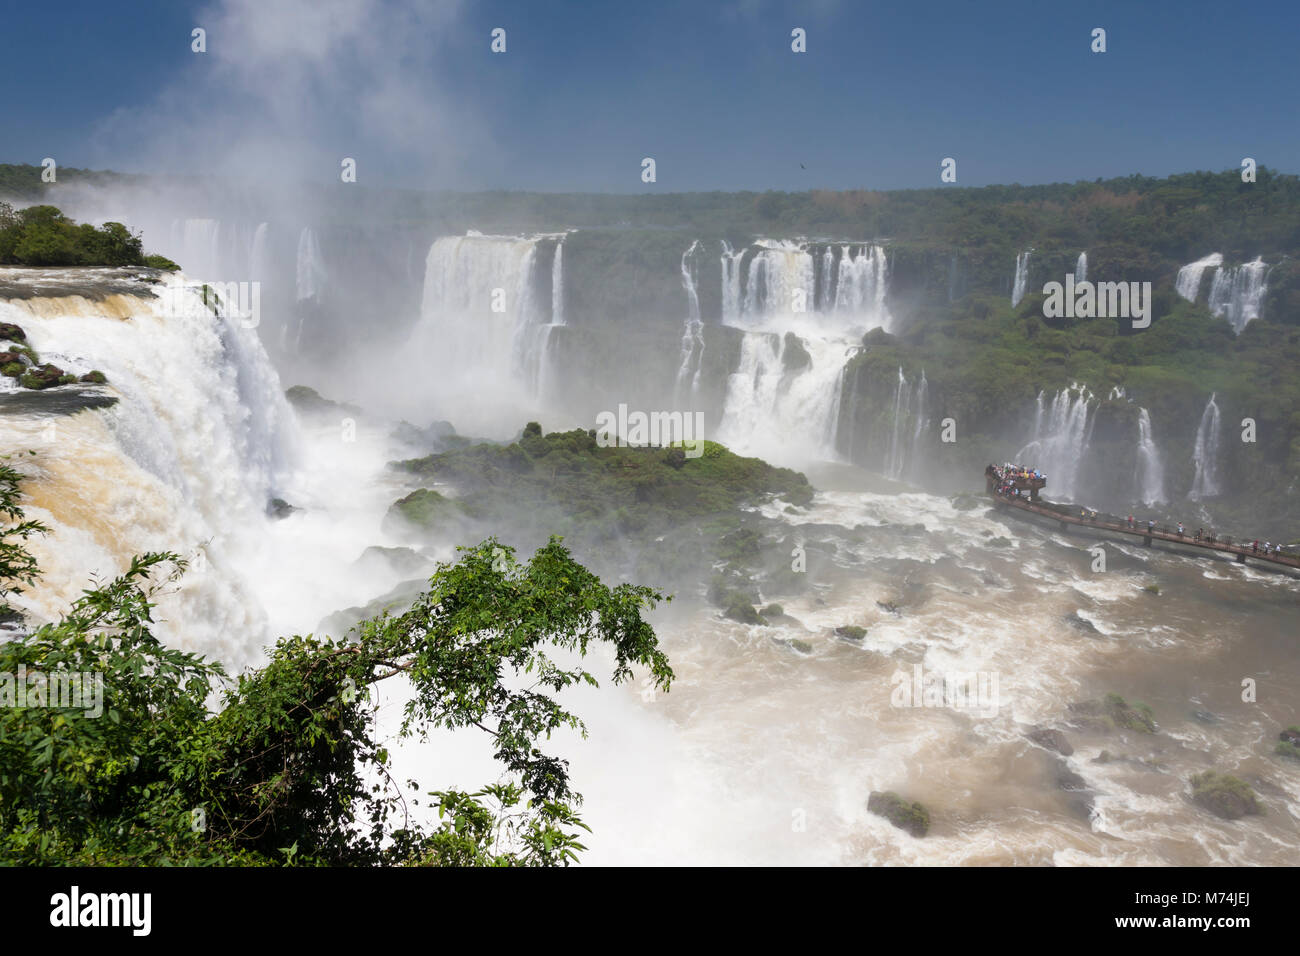 Aerial panorama Iguazu Falls waterfalls with perspective, tourists in mist on walkway, UNESCO world heritage site, natural wonders of the world Stock Photo